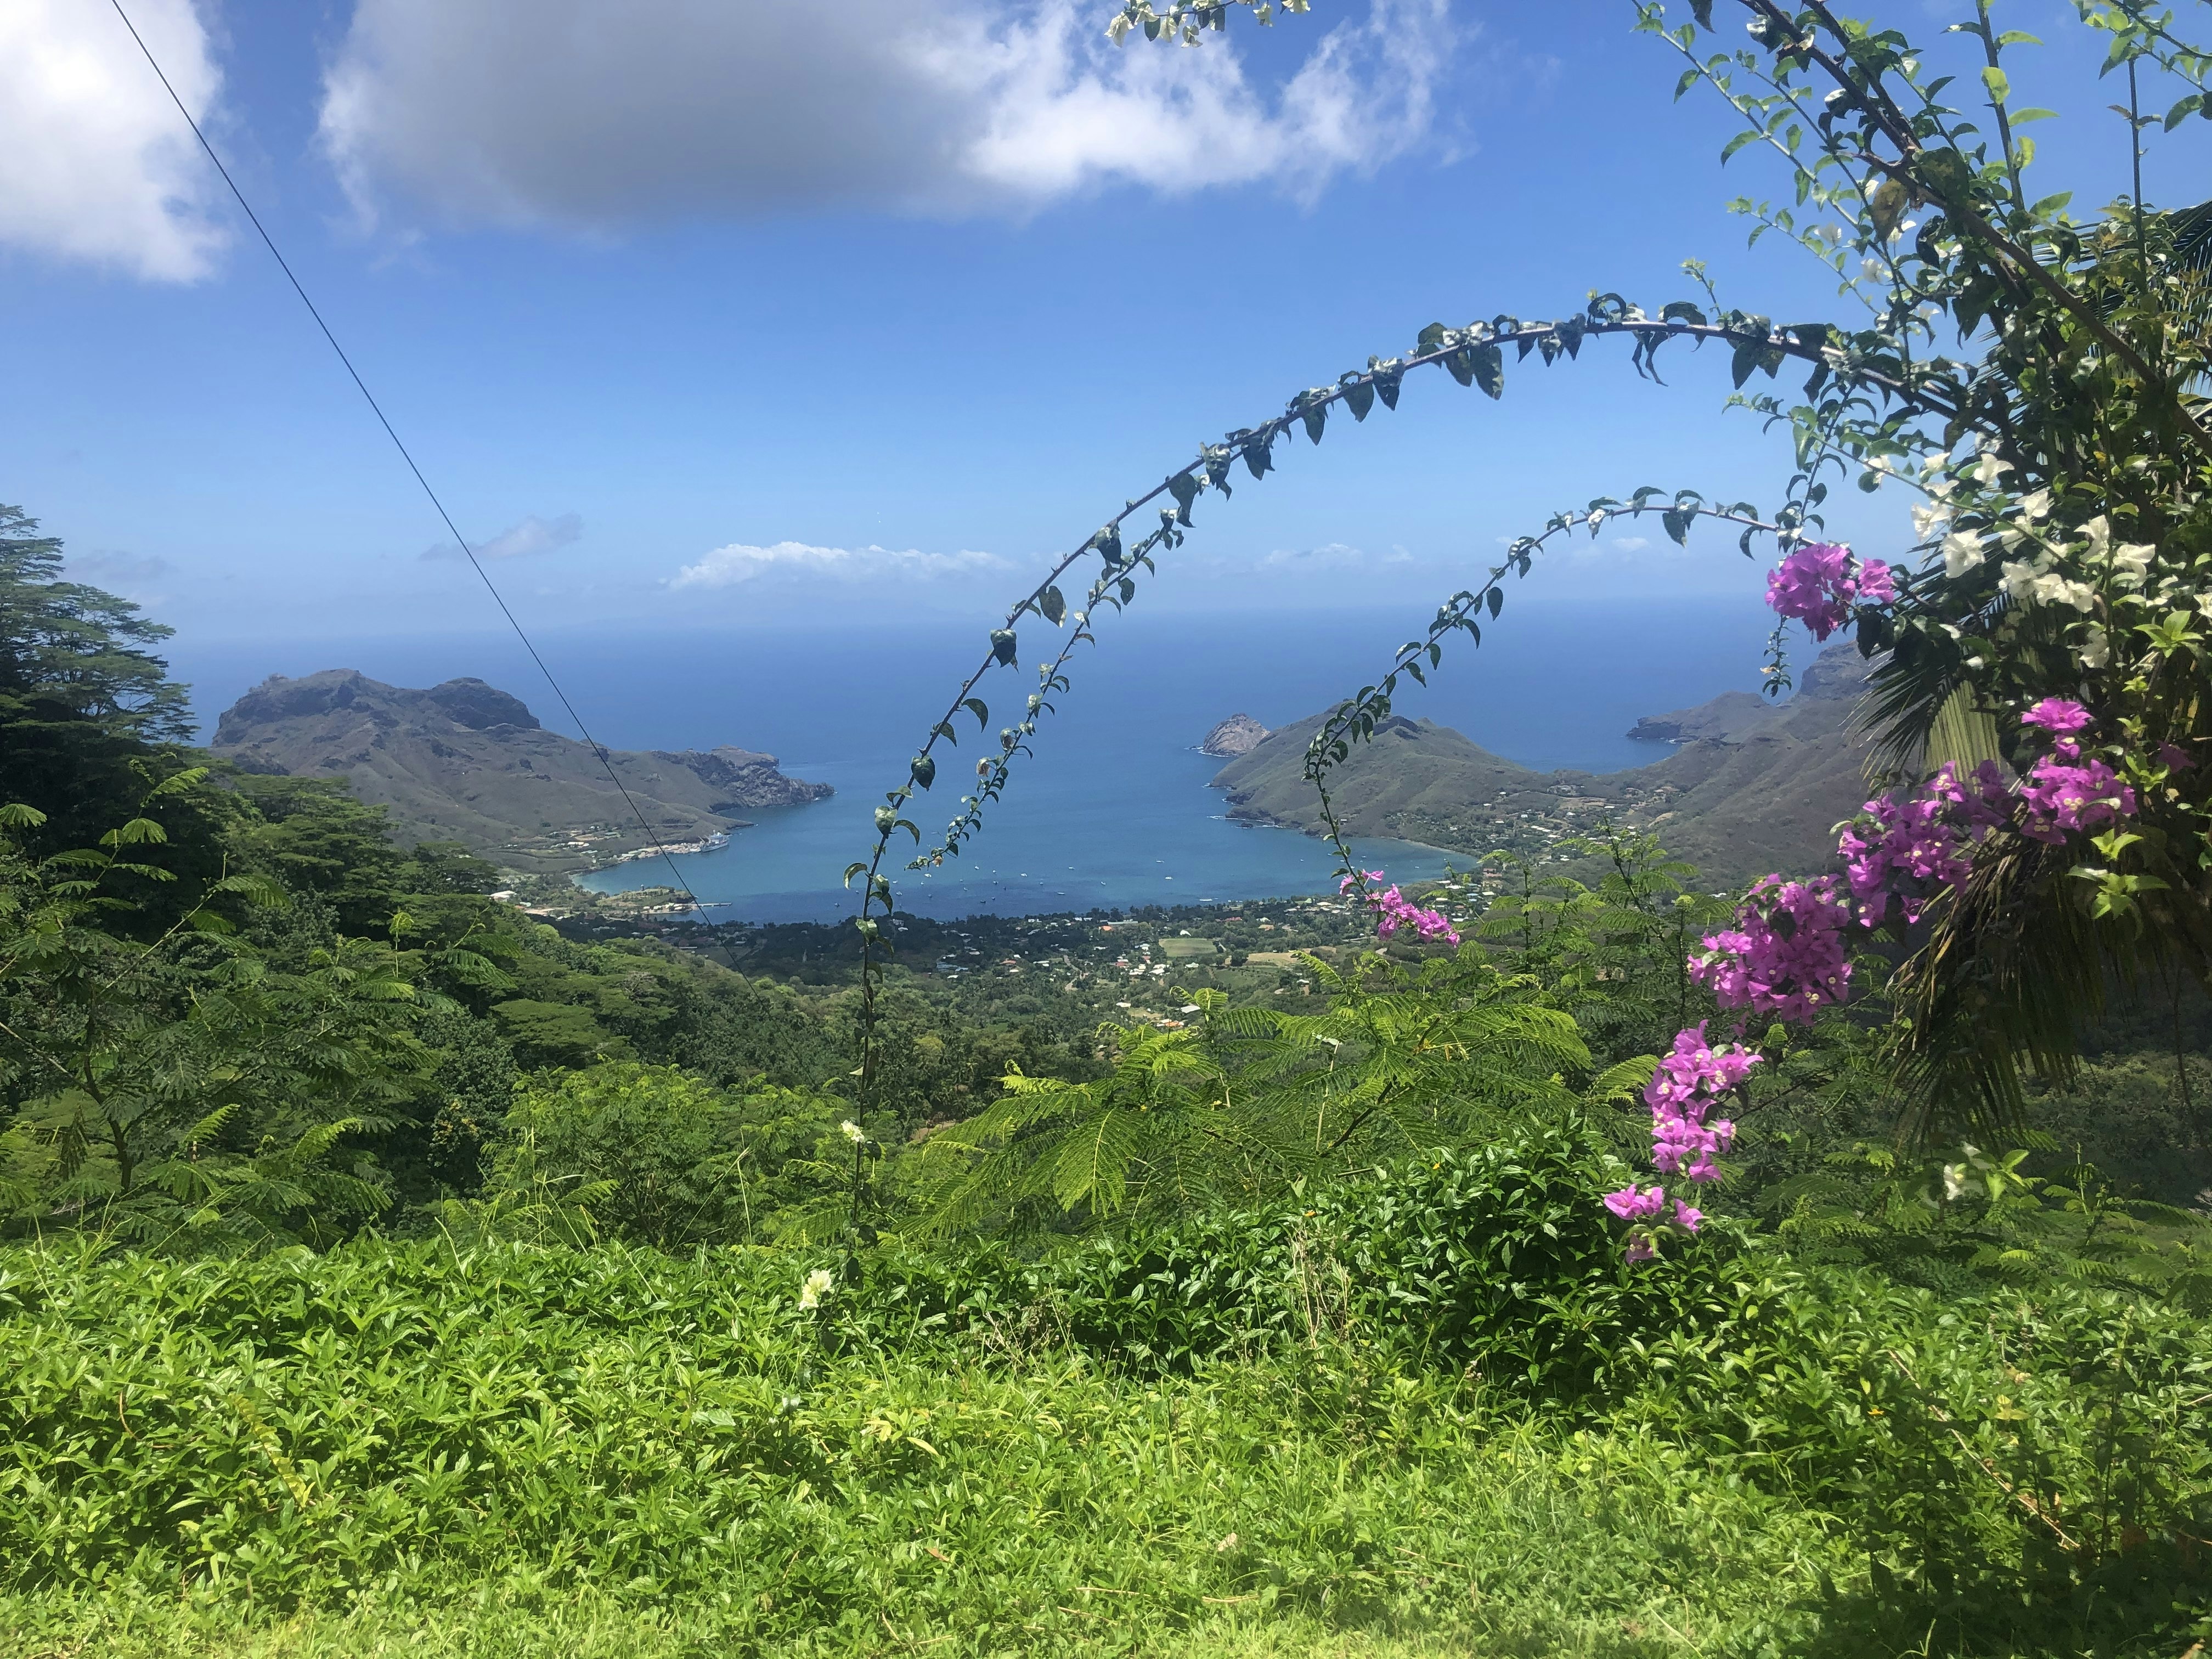 A view of the beach through wildflowers in Nuku Hiva